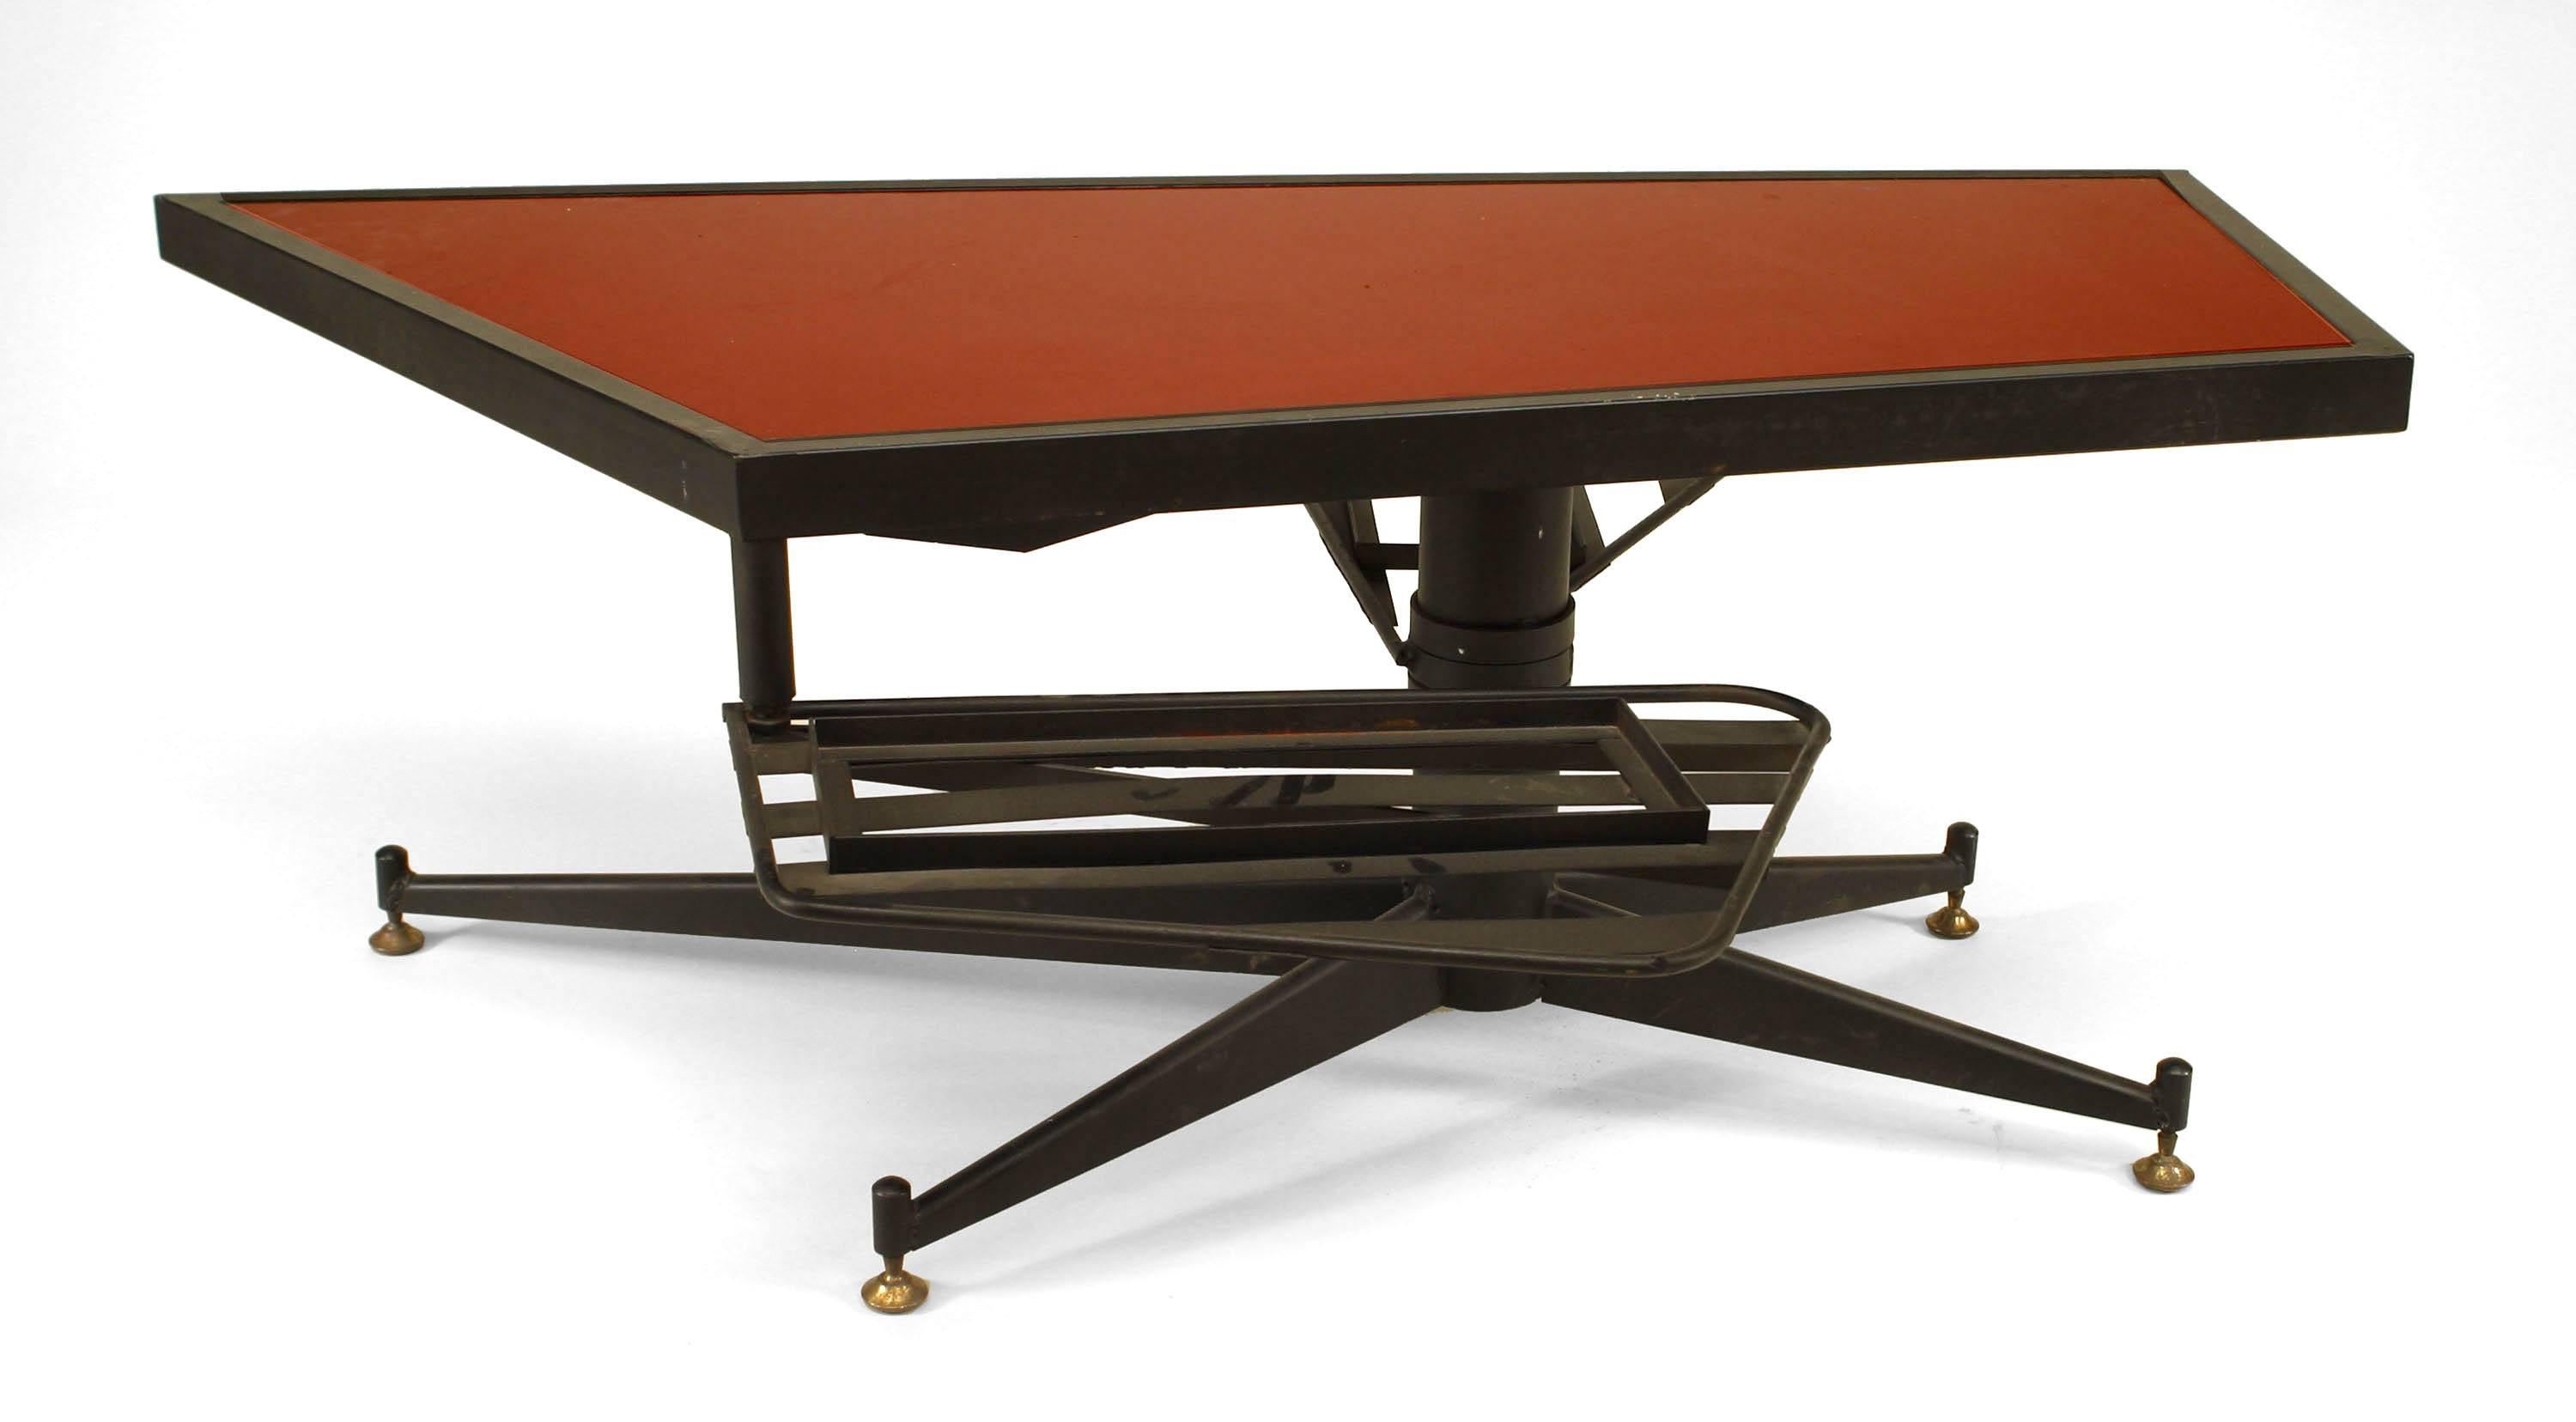 French Mid-Century Modern (1950s) ebonized metal coffee table with an irregularly-shaped top with inset red glass and a pedestal base with two swivel shelves.
